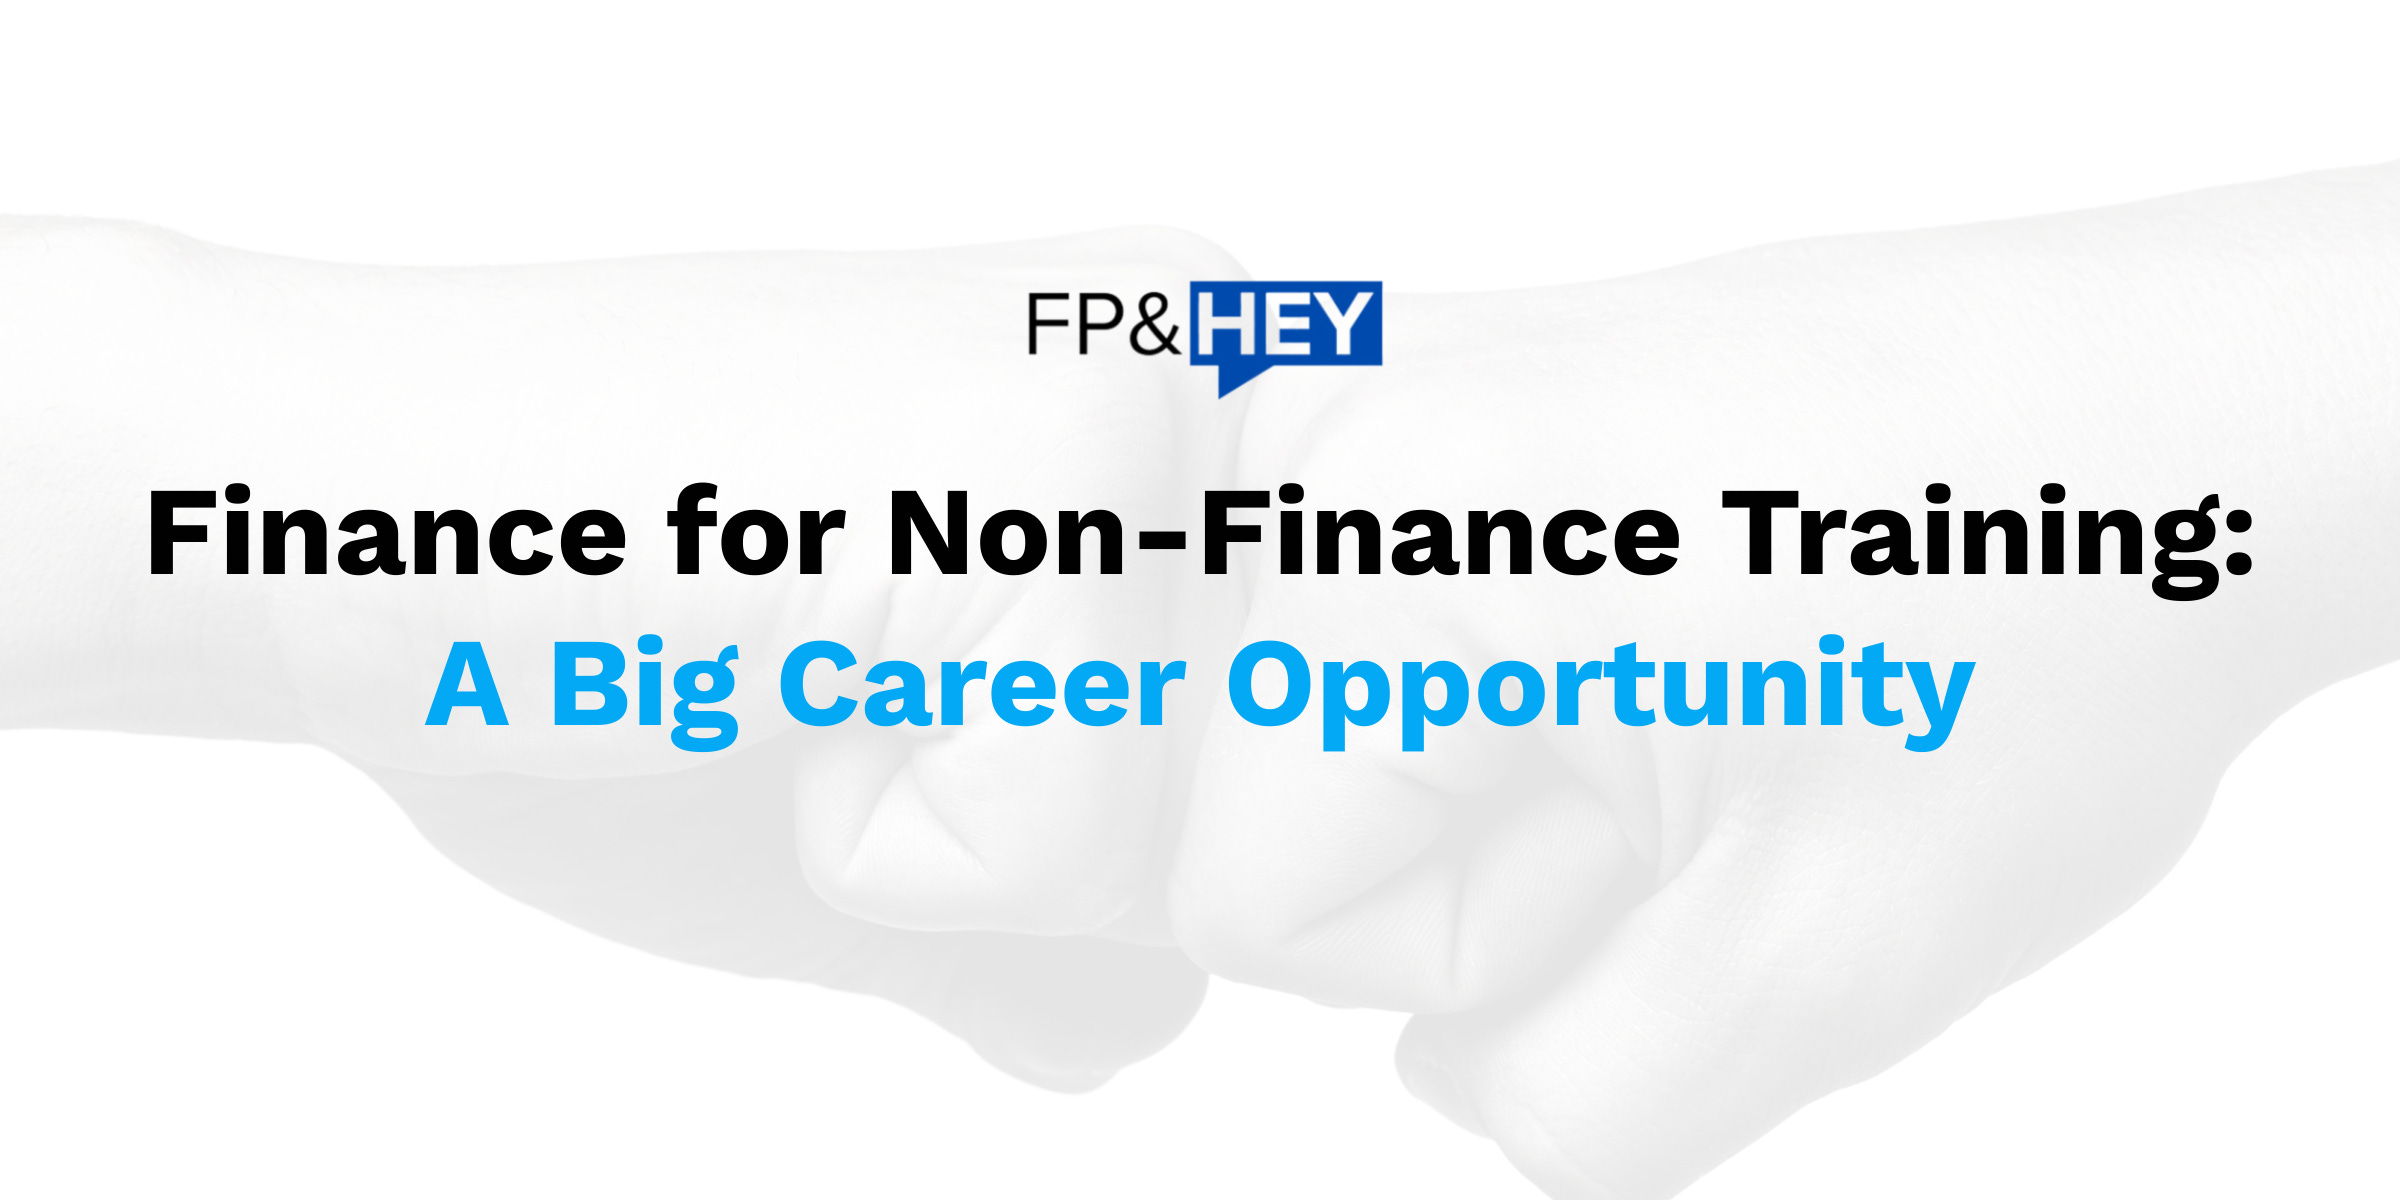 Finance for Non-finance Training: A Big Career Opportunity